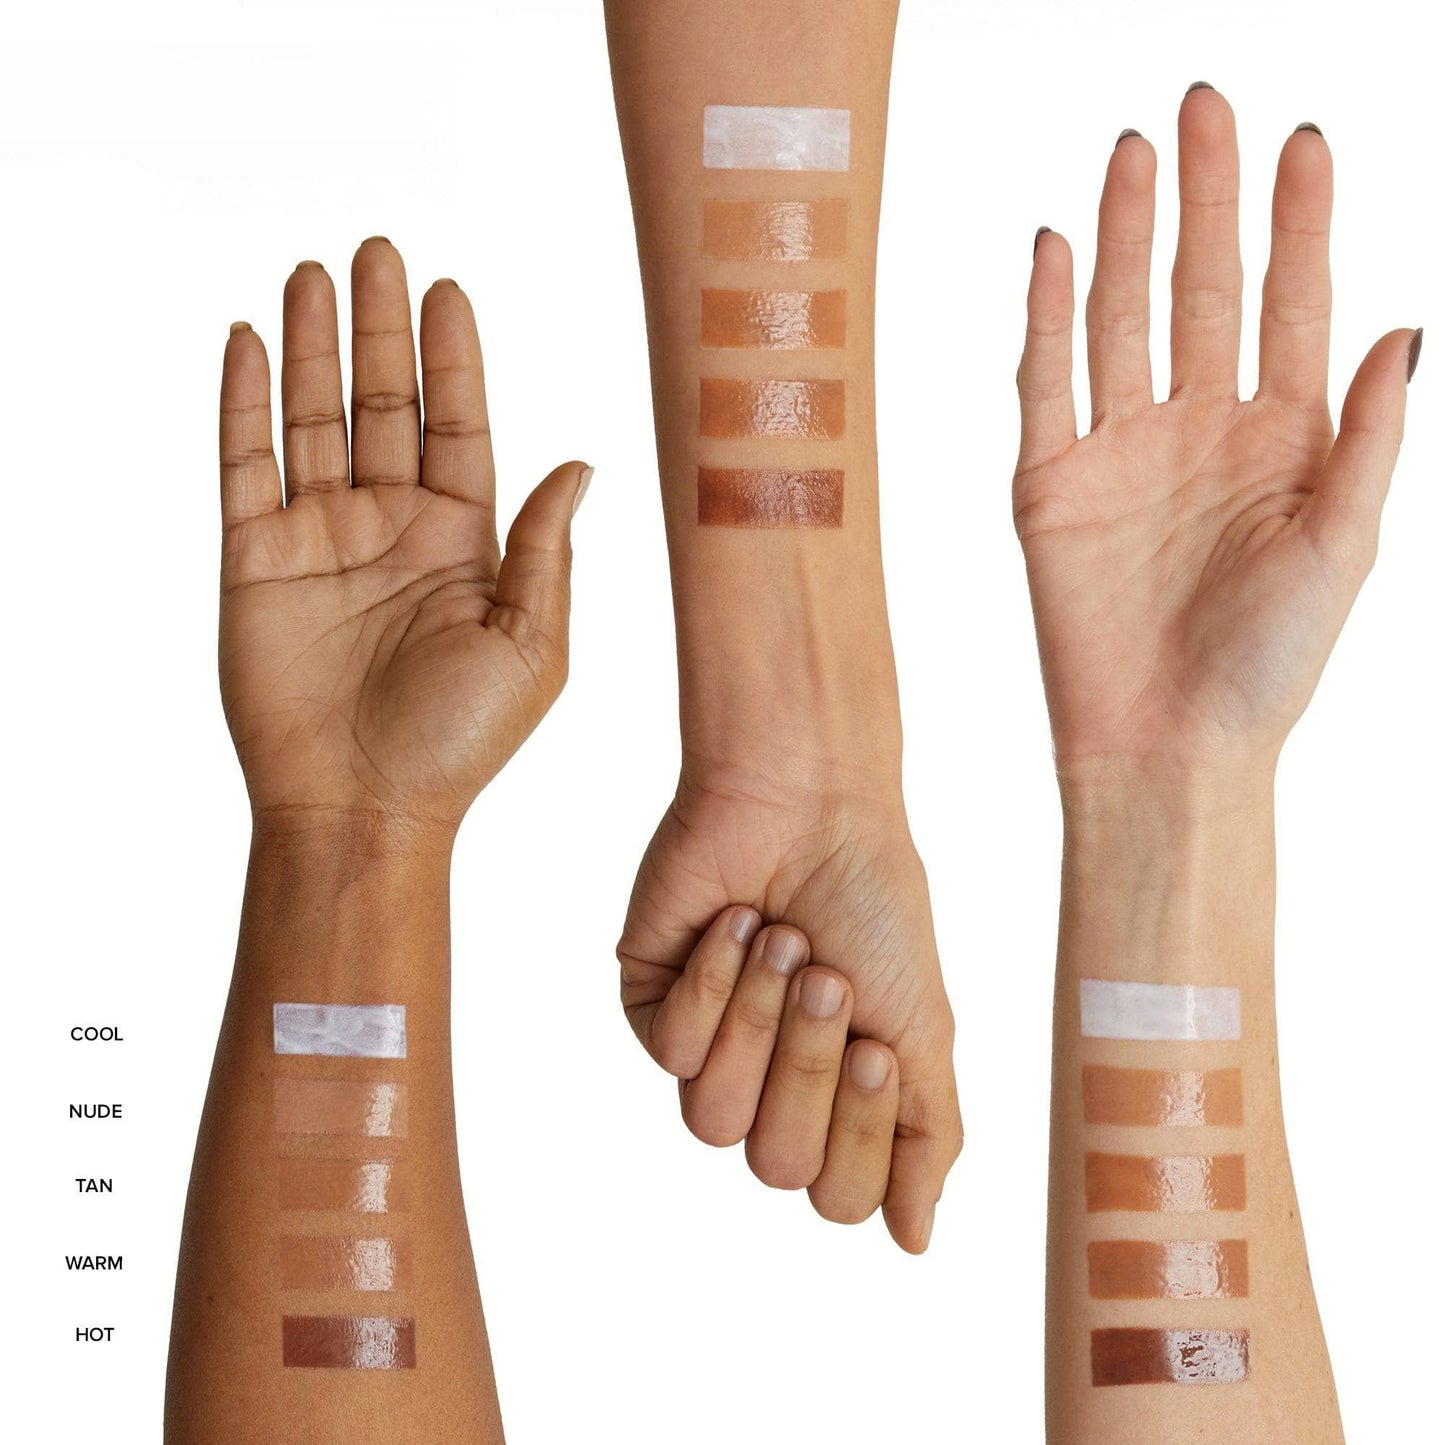 Arms with swatches of Nudescreen in shade Nude